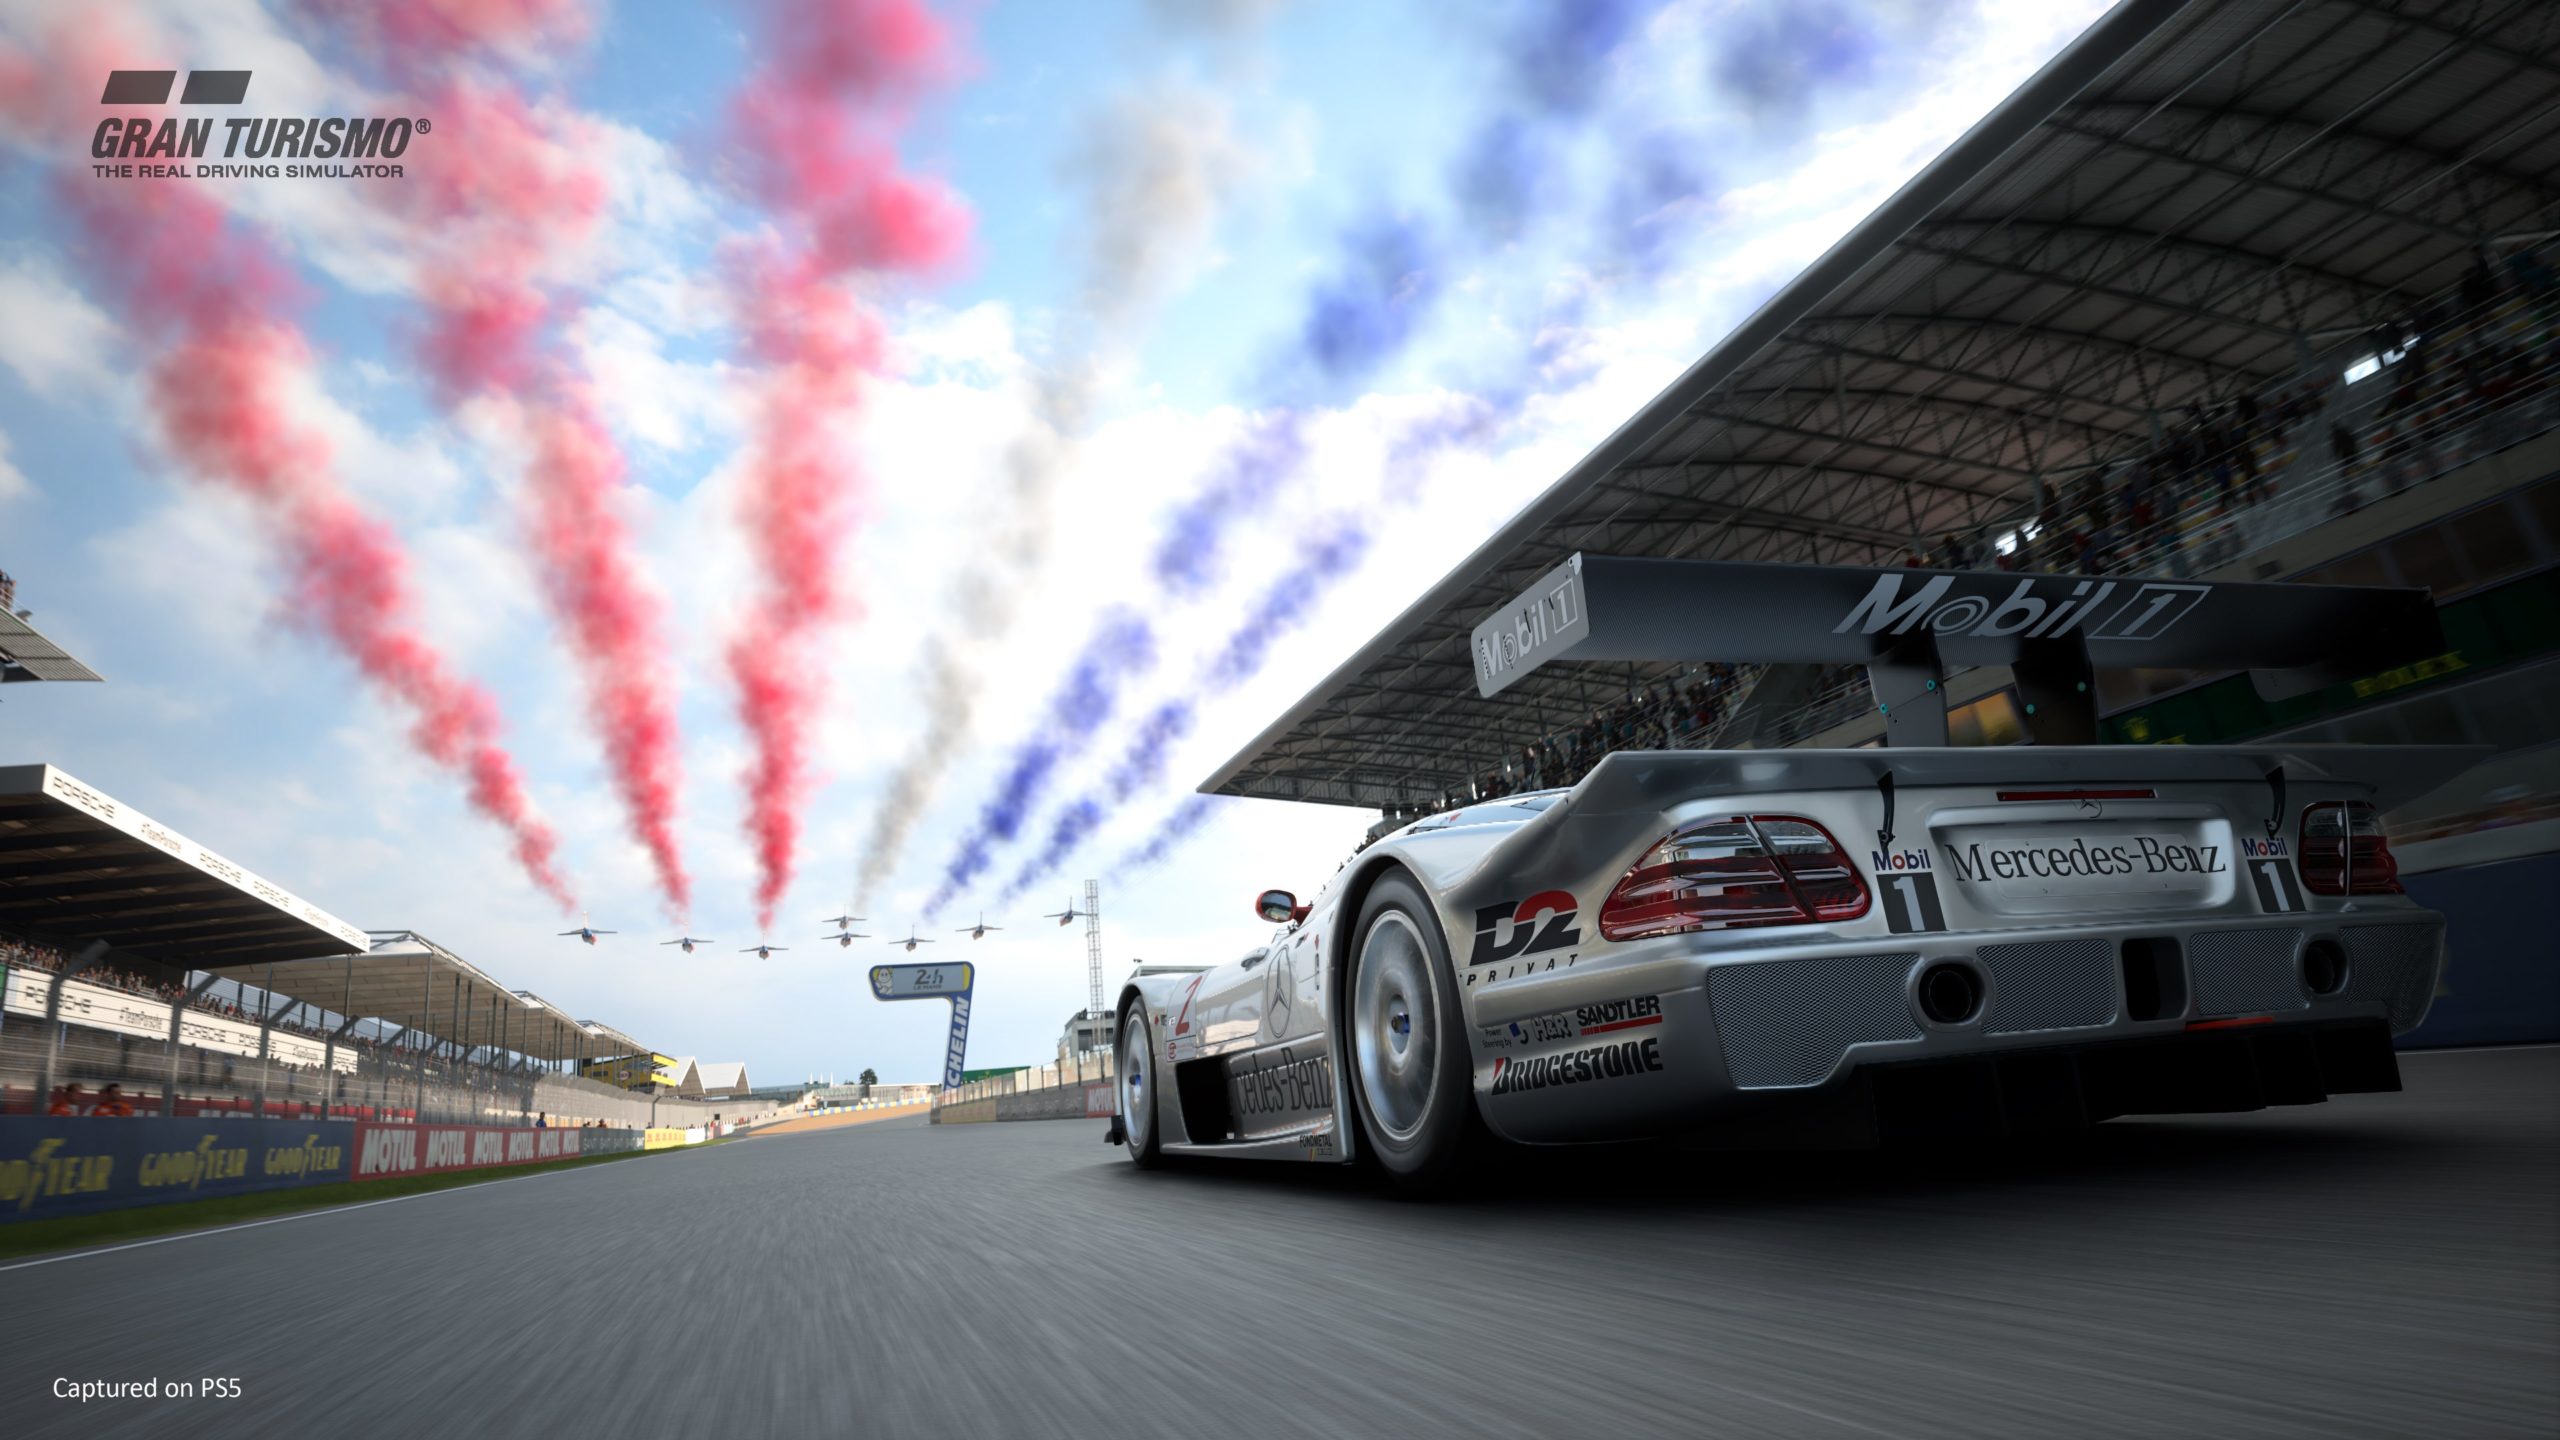 Latest Gran Turismo 7 patch relies more on microtransactions, and gamers  are pissed